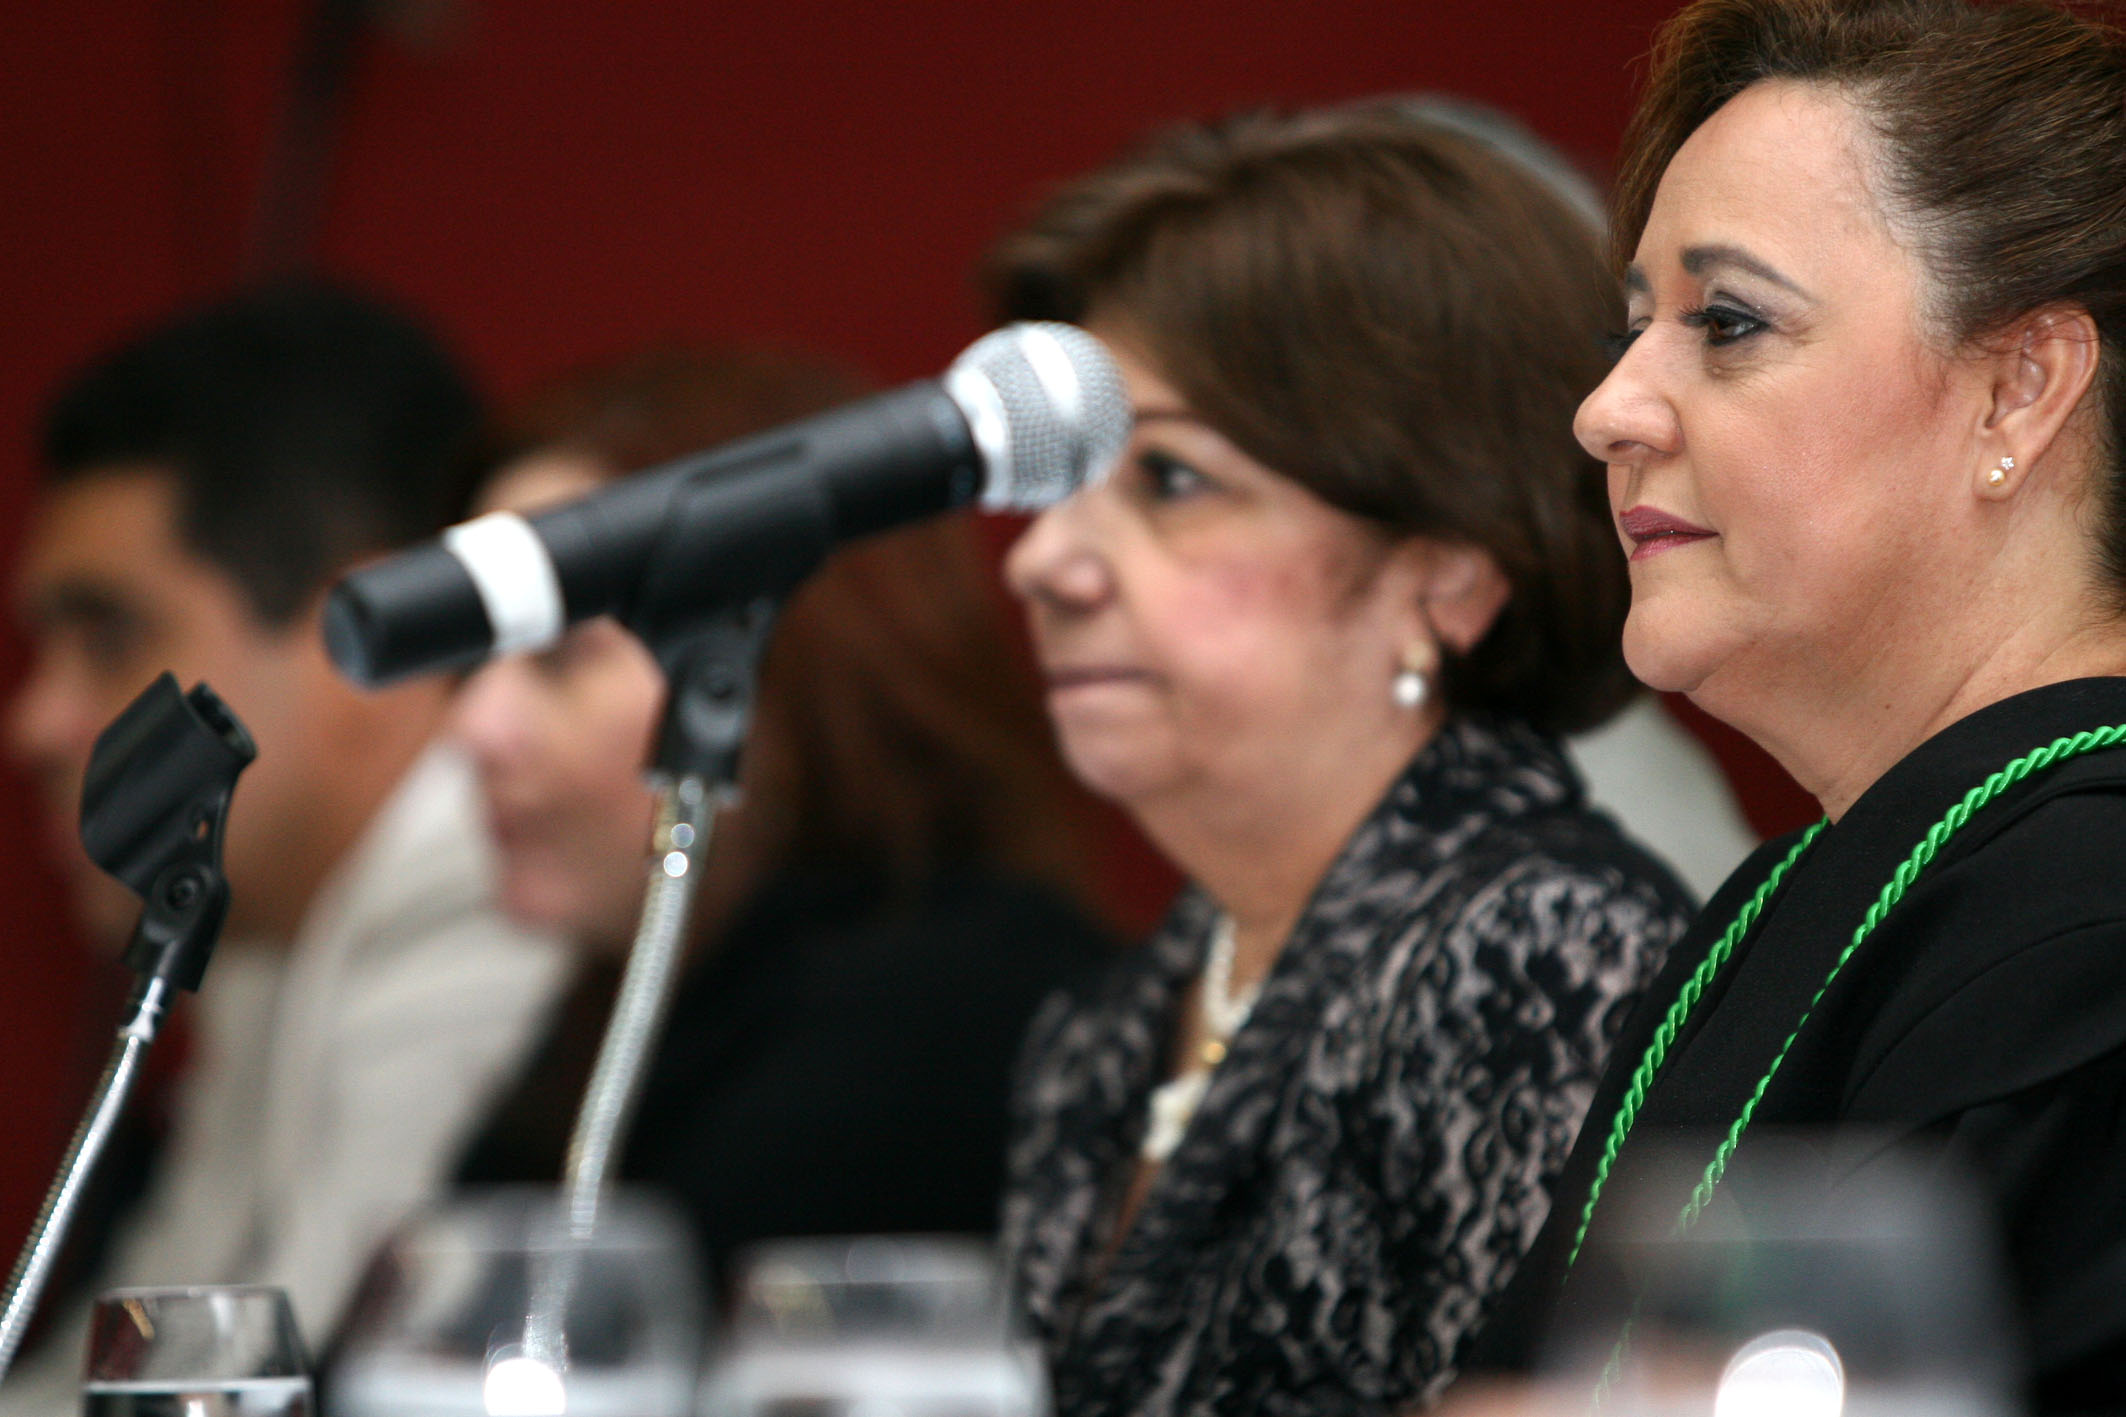 two women sitting at tables with microphones in front of them